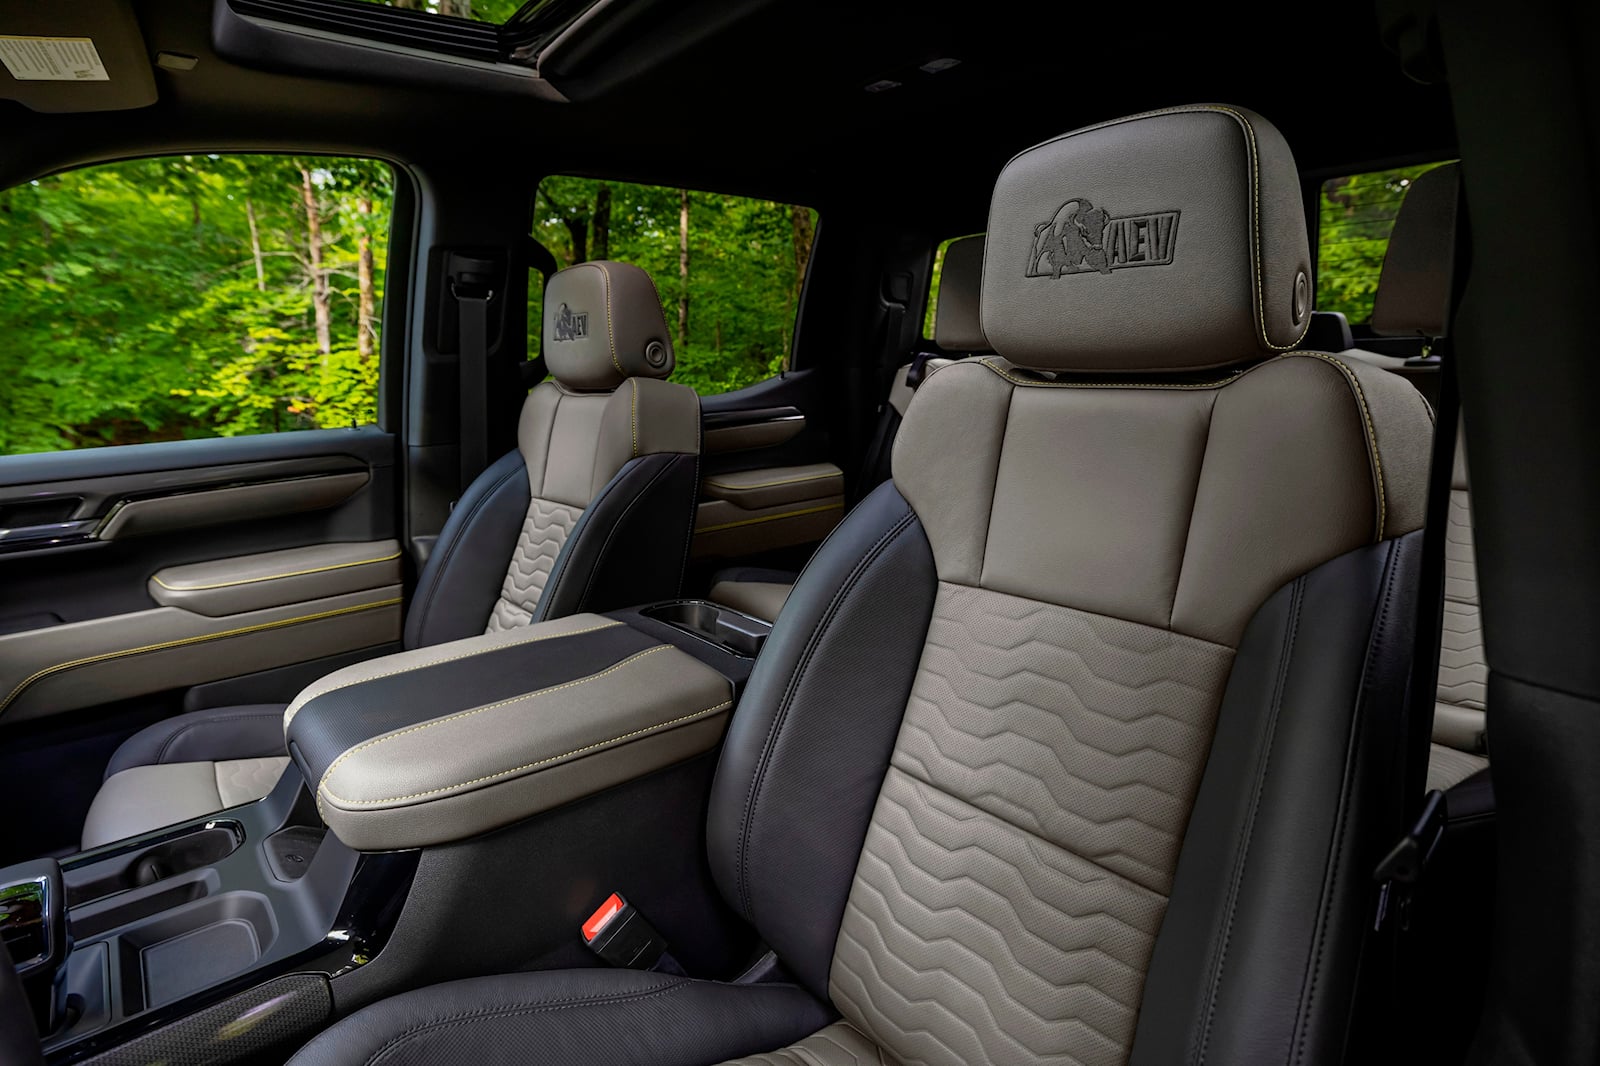 2022 Chevrolet Silverado 1500 Arrives With Upscale Interior Super Cruise  And Plenty Of Tech  Carscoops